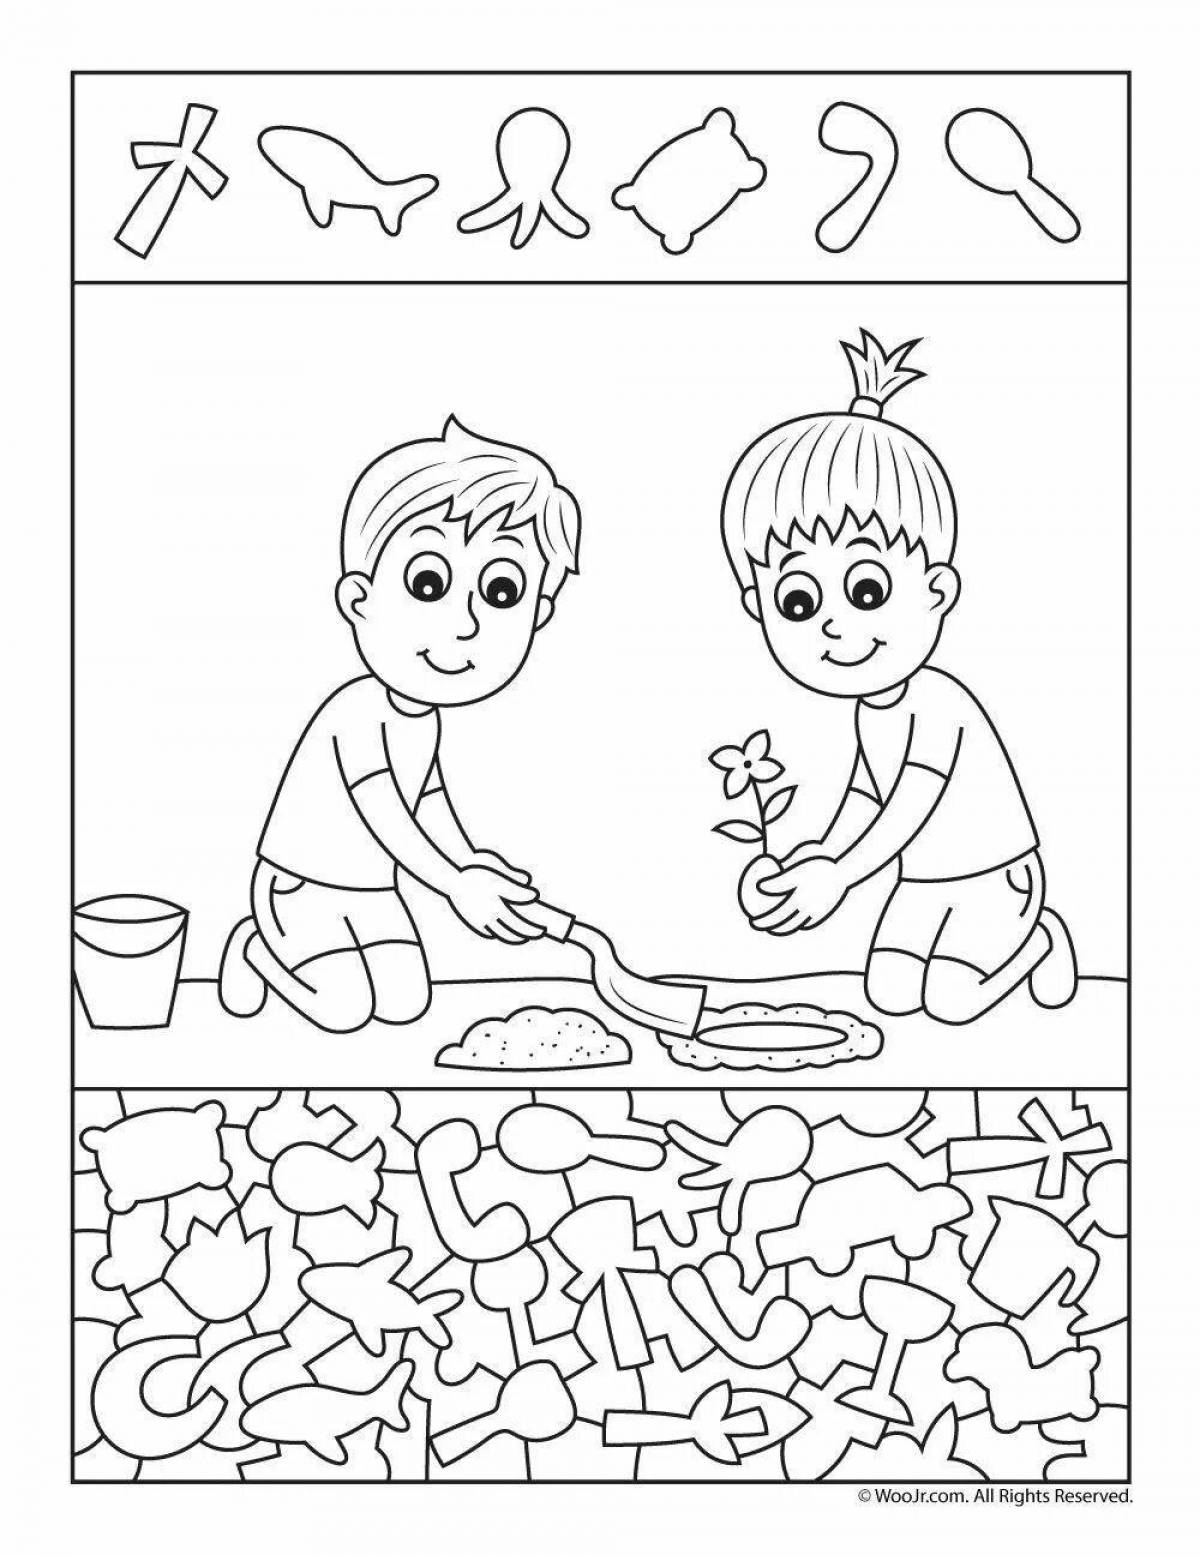 Entertaining coloring for mindfulness